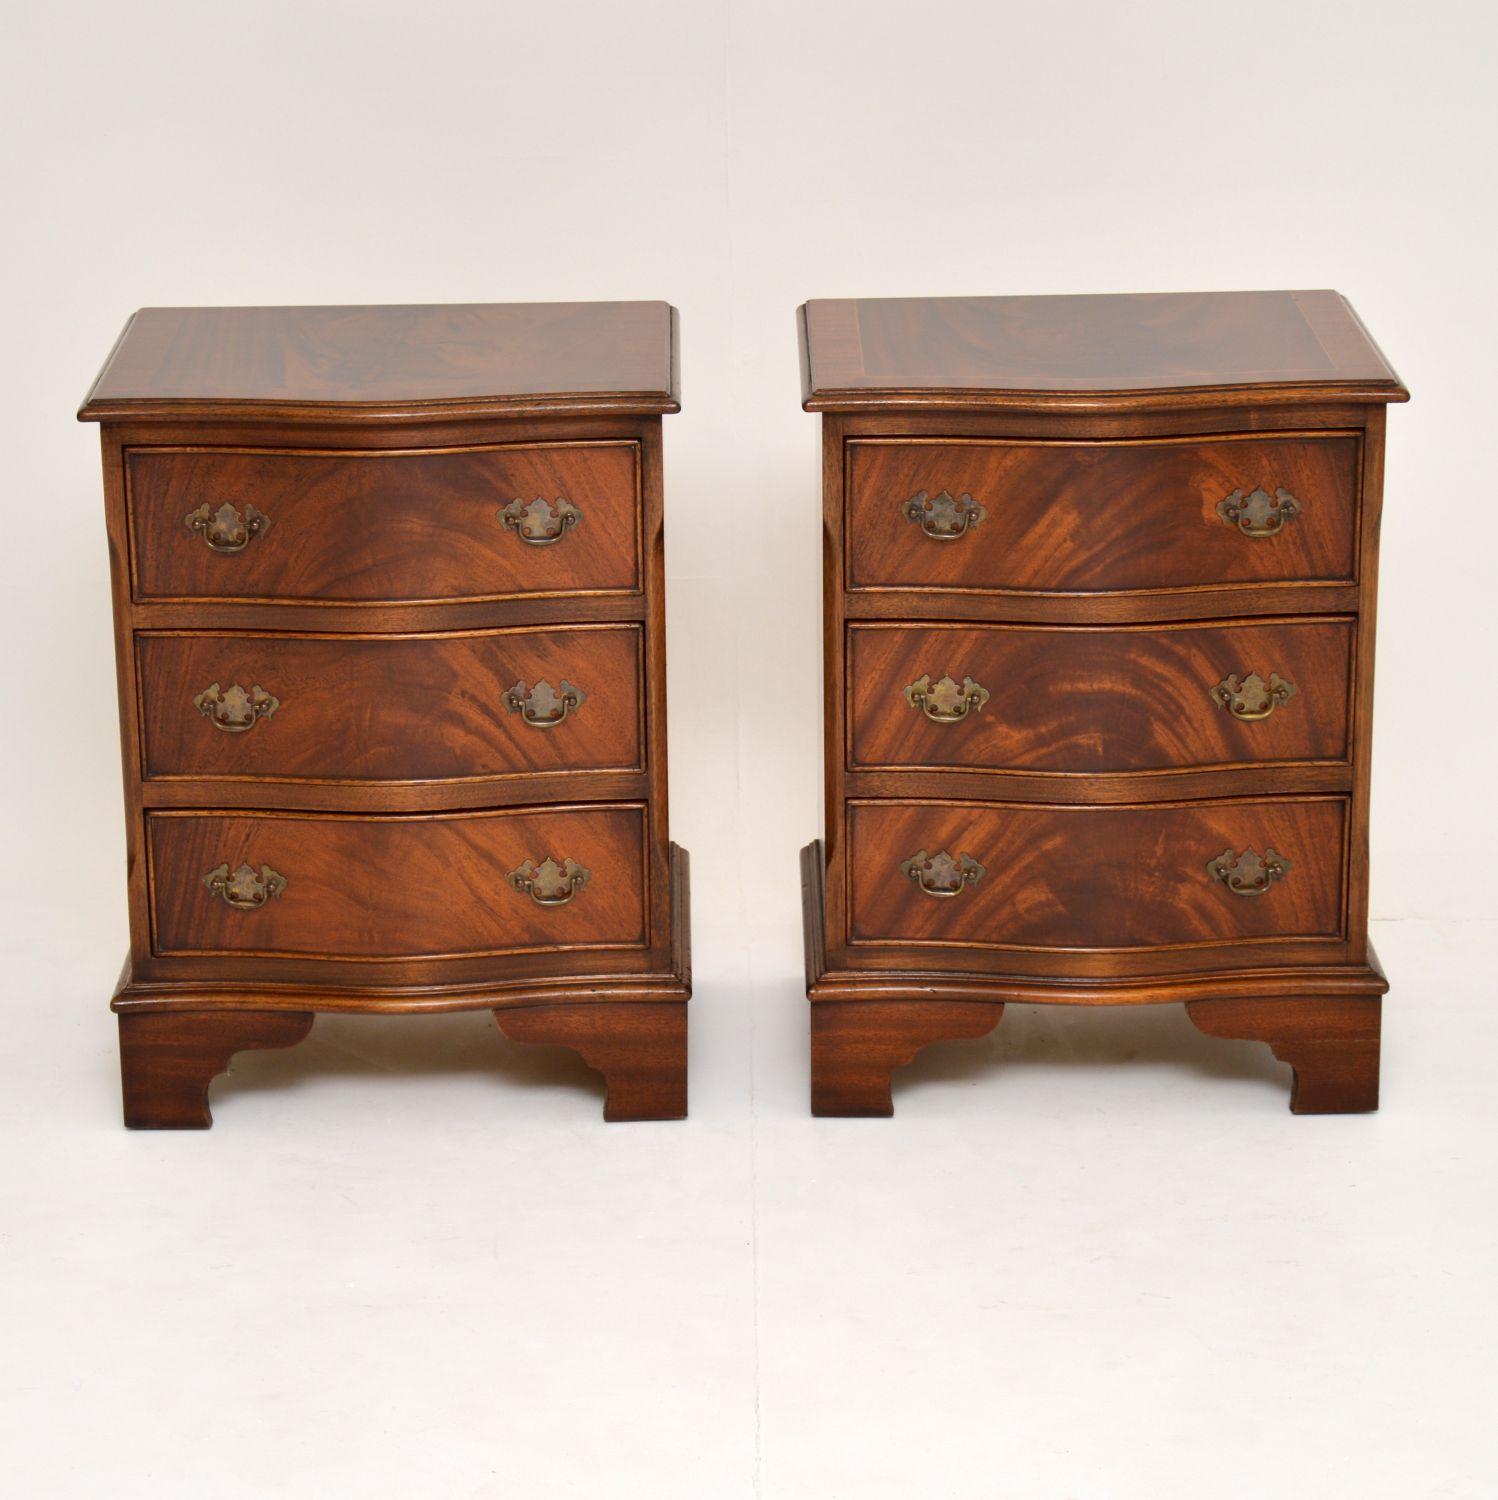 Pair of antique Georgian style flame mahogany bedside chests with serpentine shaped fronts, in excellent condition and dating from the 1950s period.

They have flame mahogany tops with satinwood inlay and mahogany cross banding. There are three